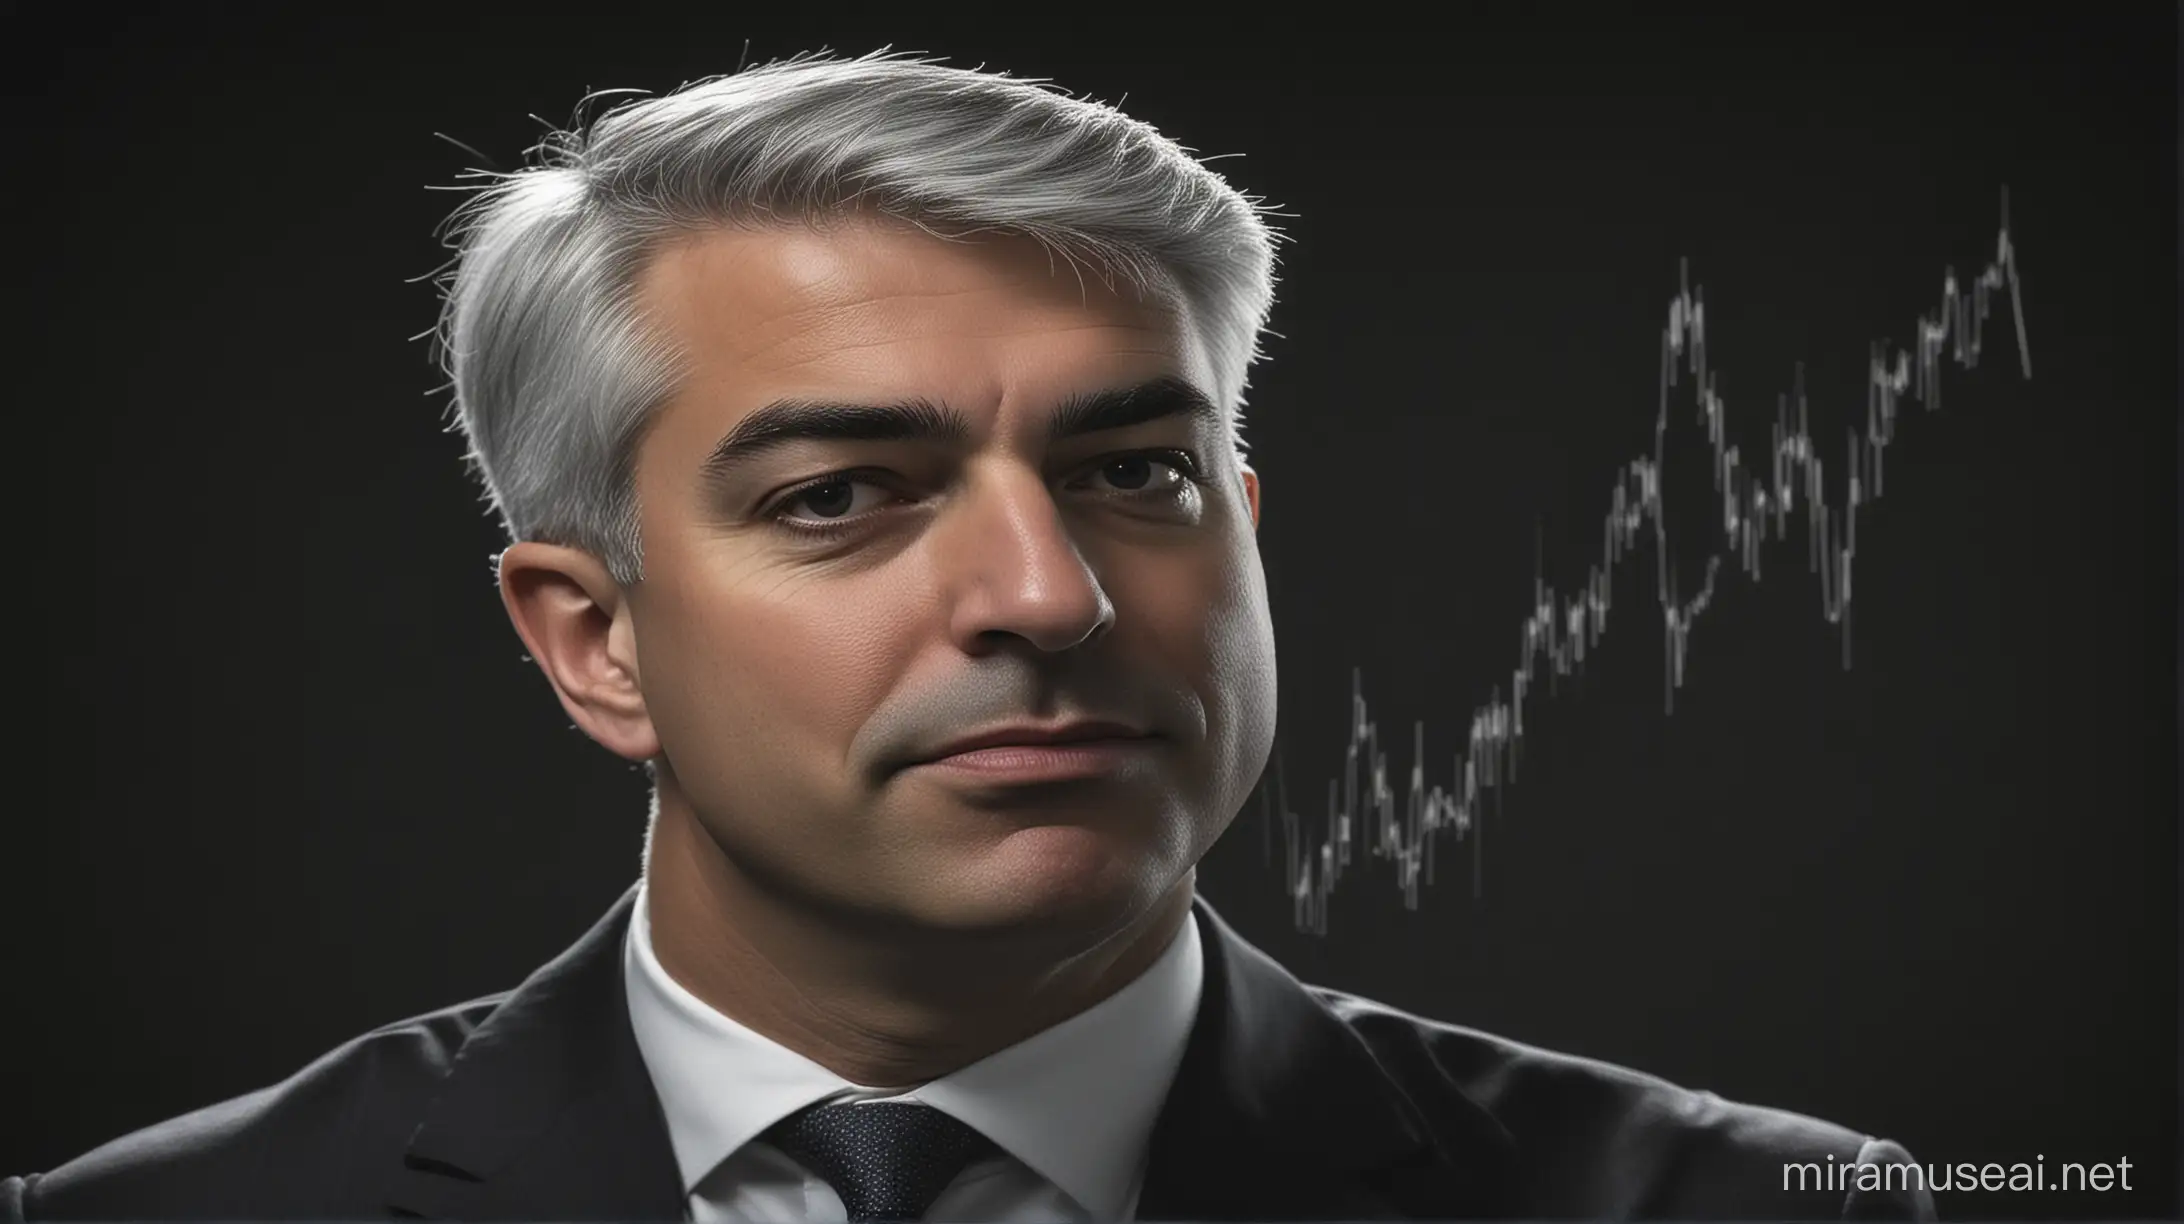 Bill Ackman's Portfolio going up and black color in background